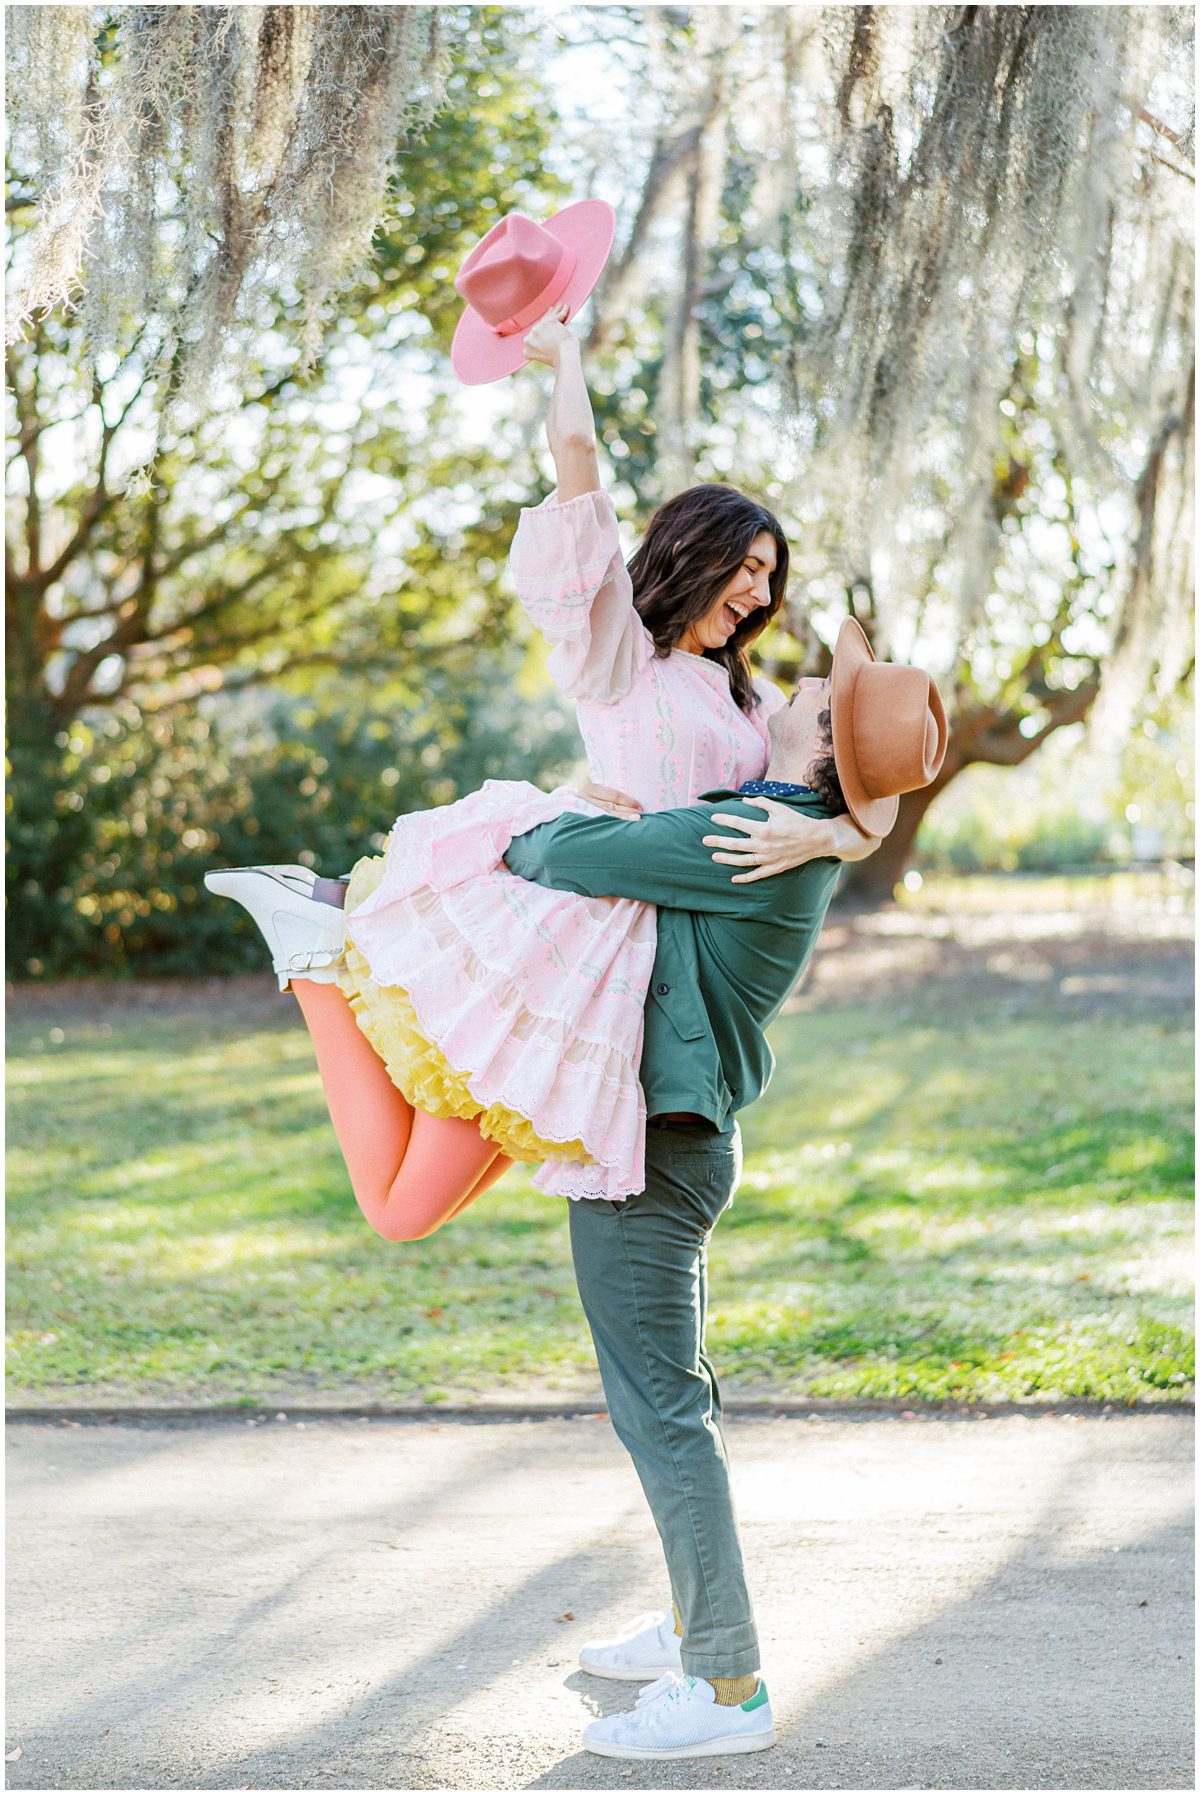 Tips for Choosing Your Engagement Photo Outfits